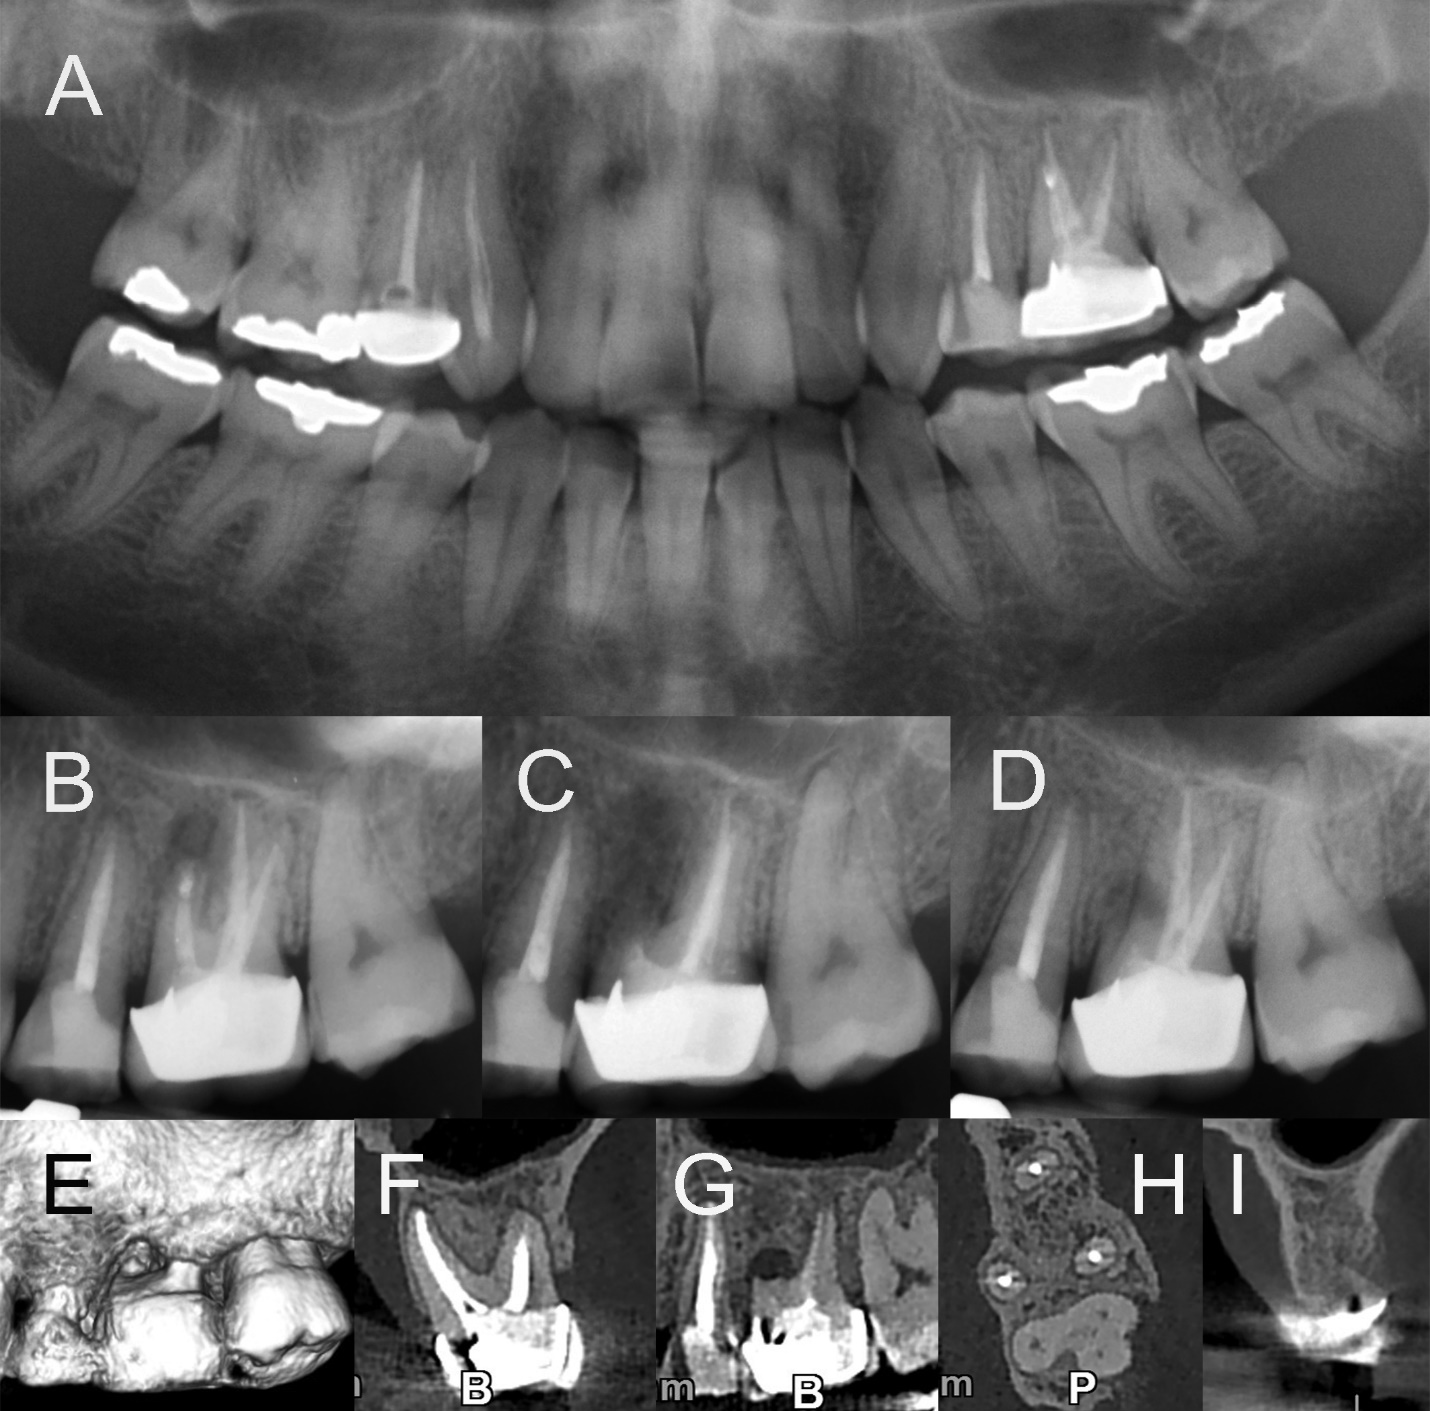 A close-up of a dental x-ray

Description automatically generated